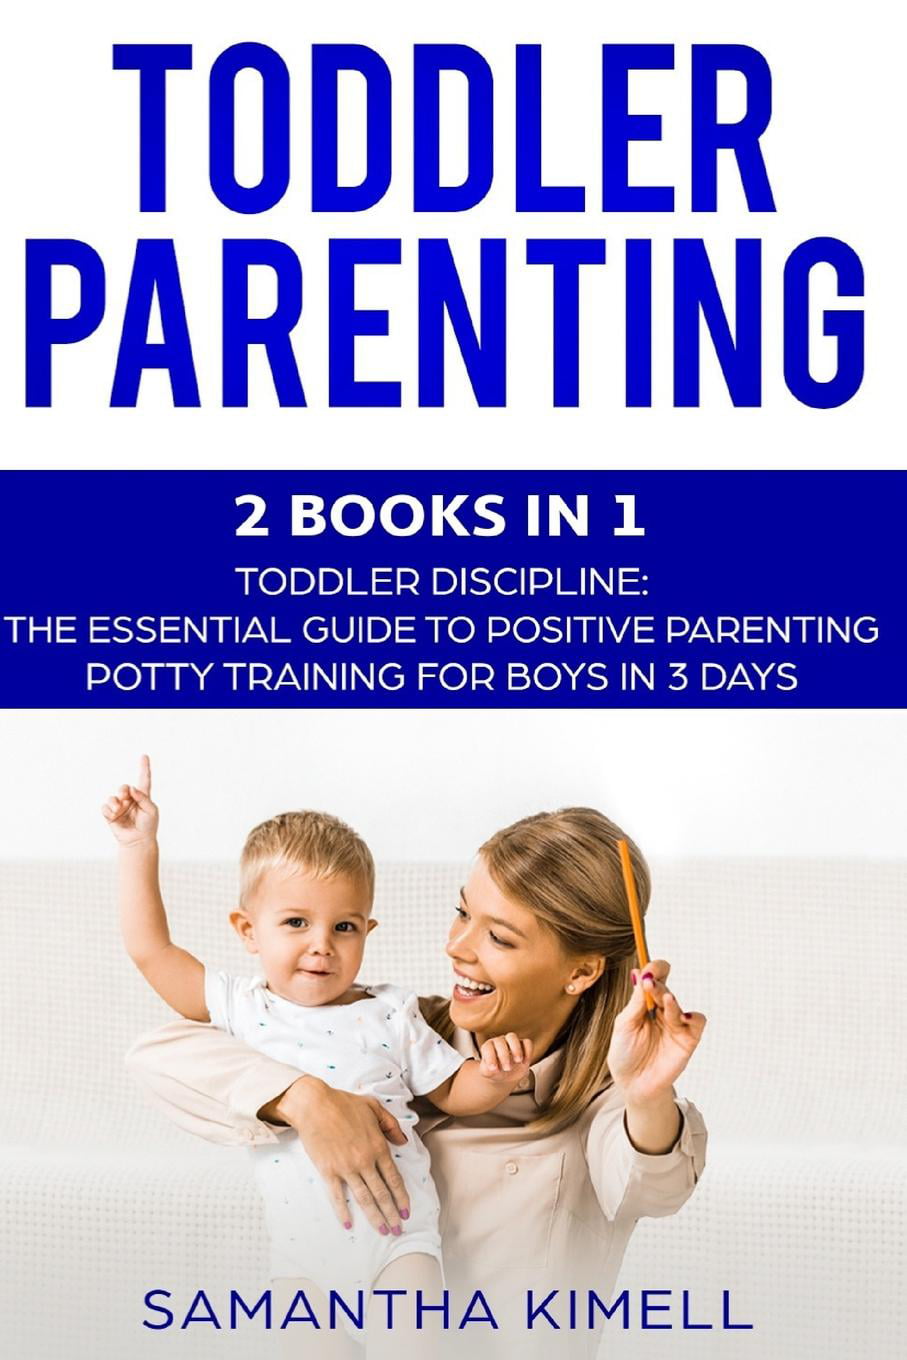 book review on parenting